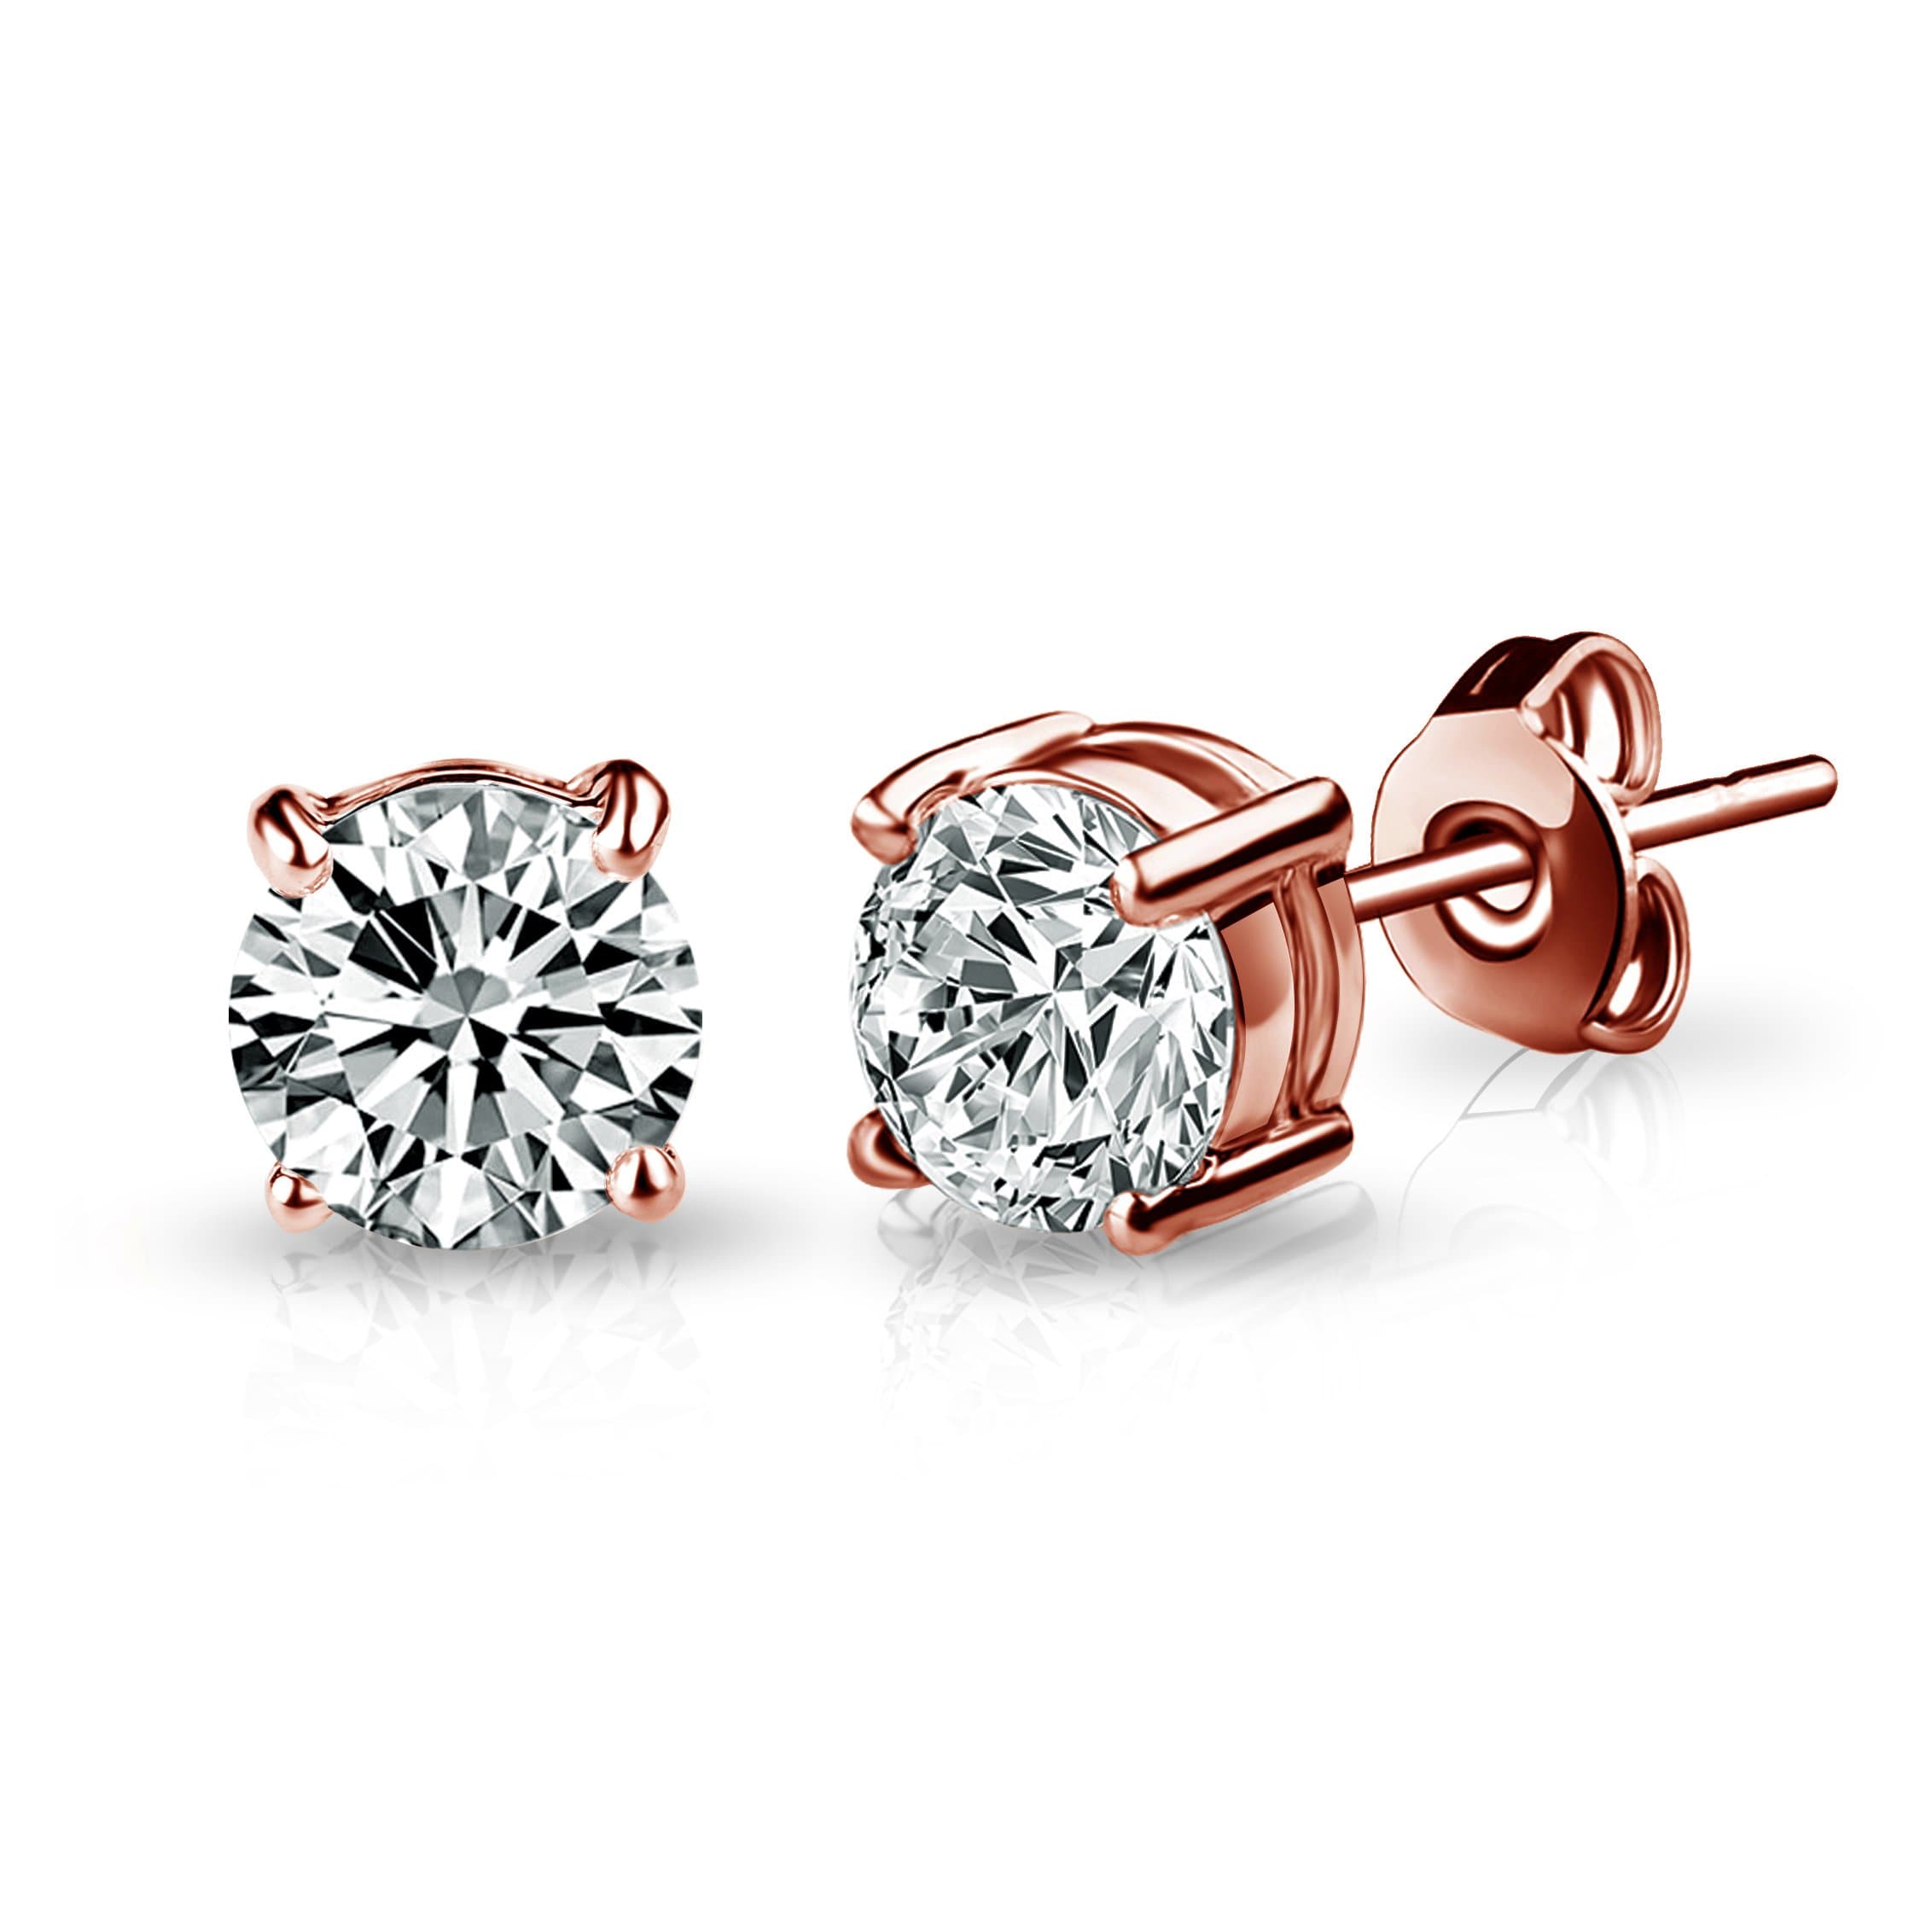 Rose Gold Plated Solitaire Crystal Stud Earrings Created with Zircondia® Crystals by Philip Jones Jewellery